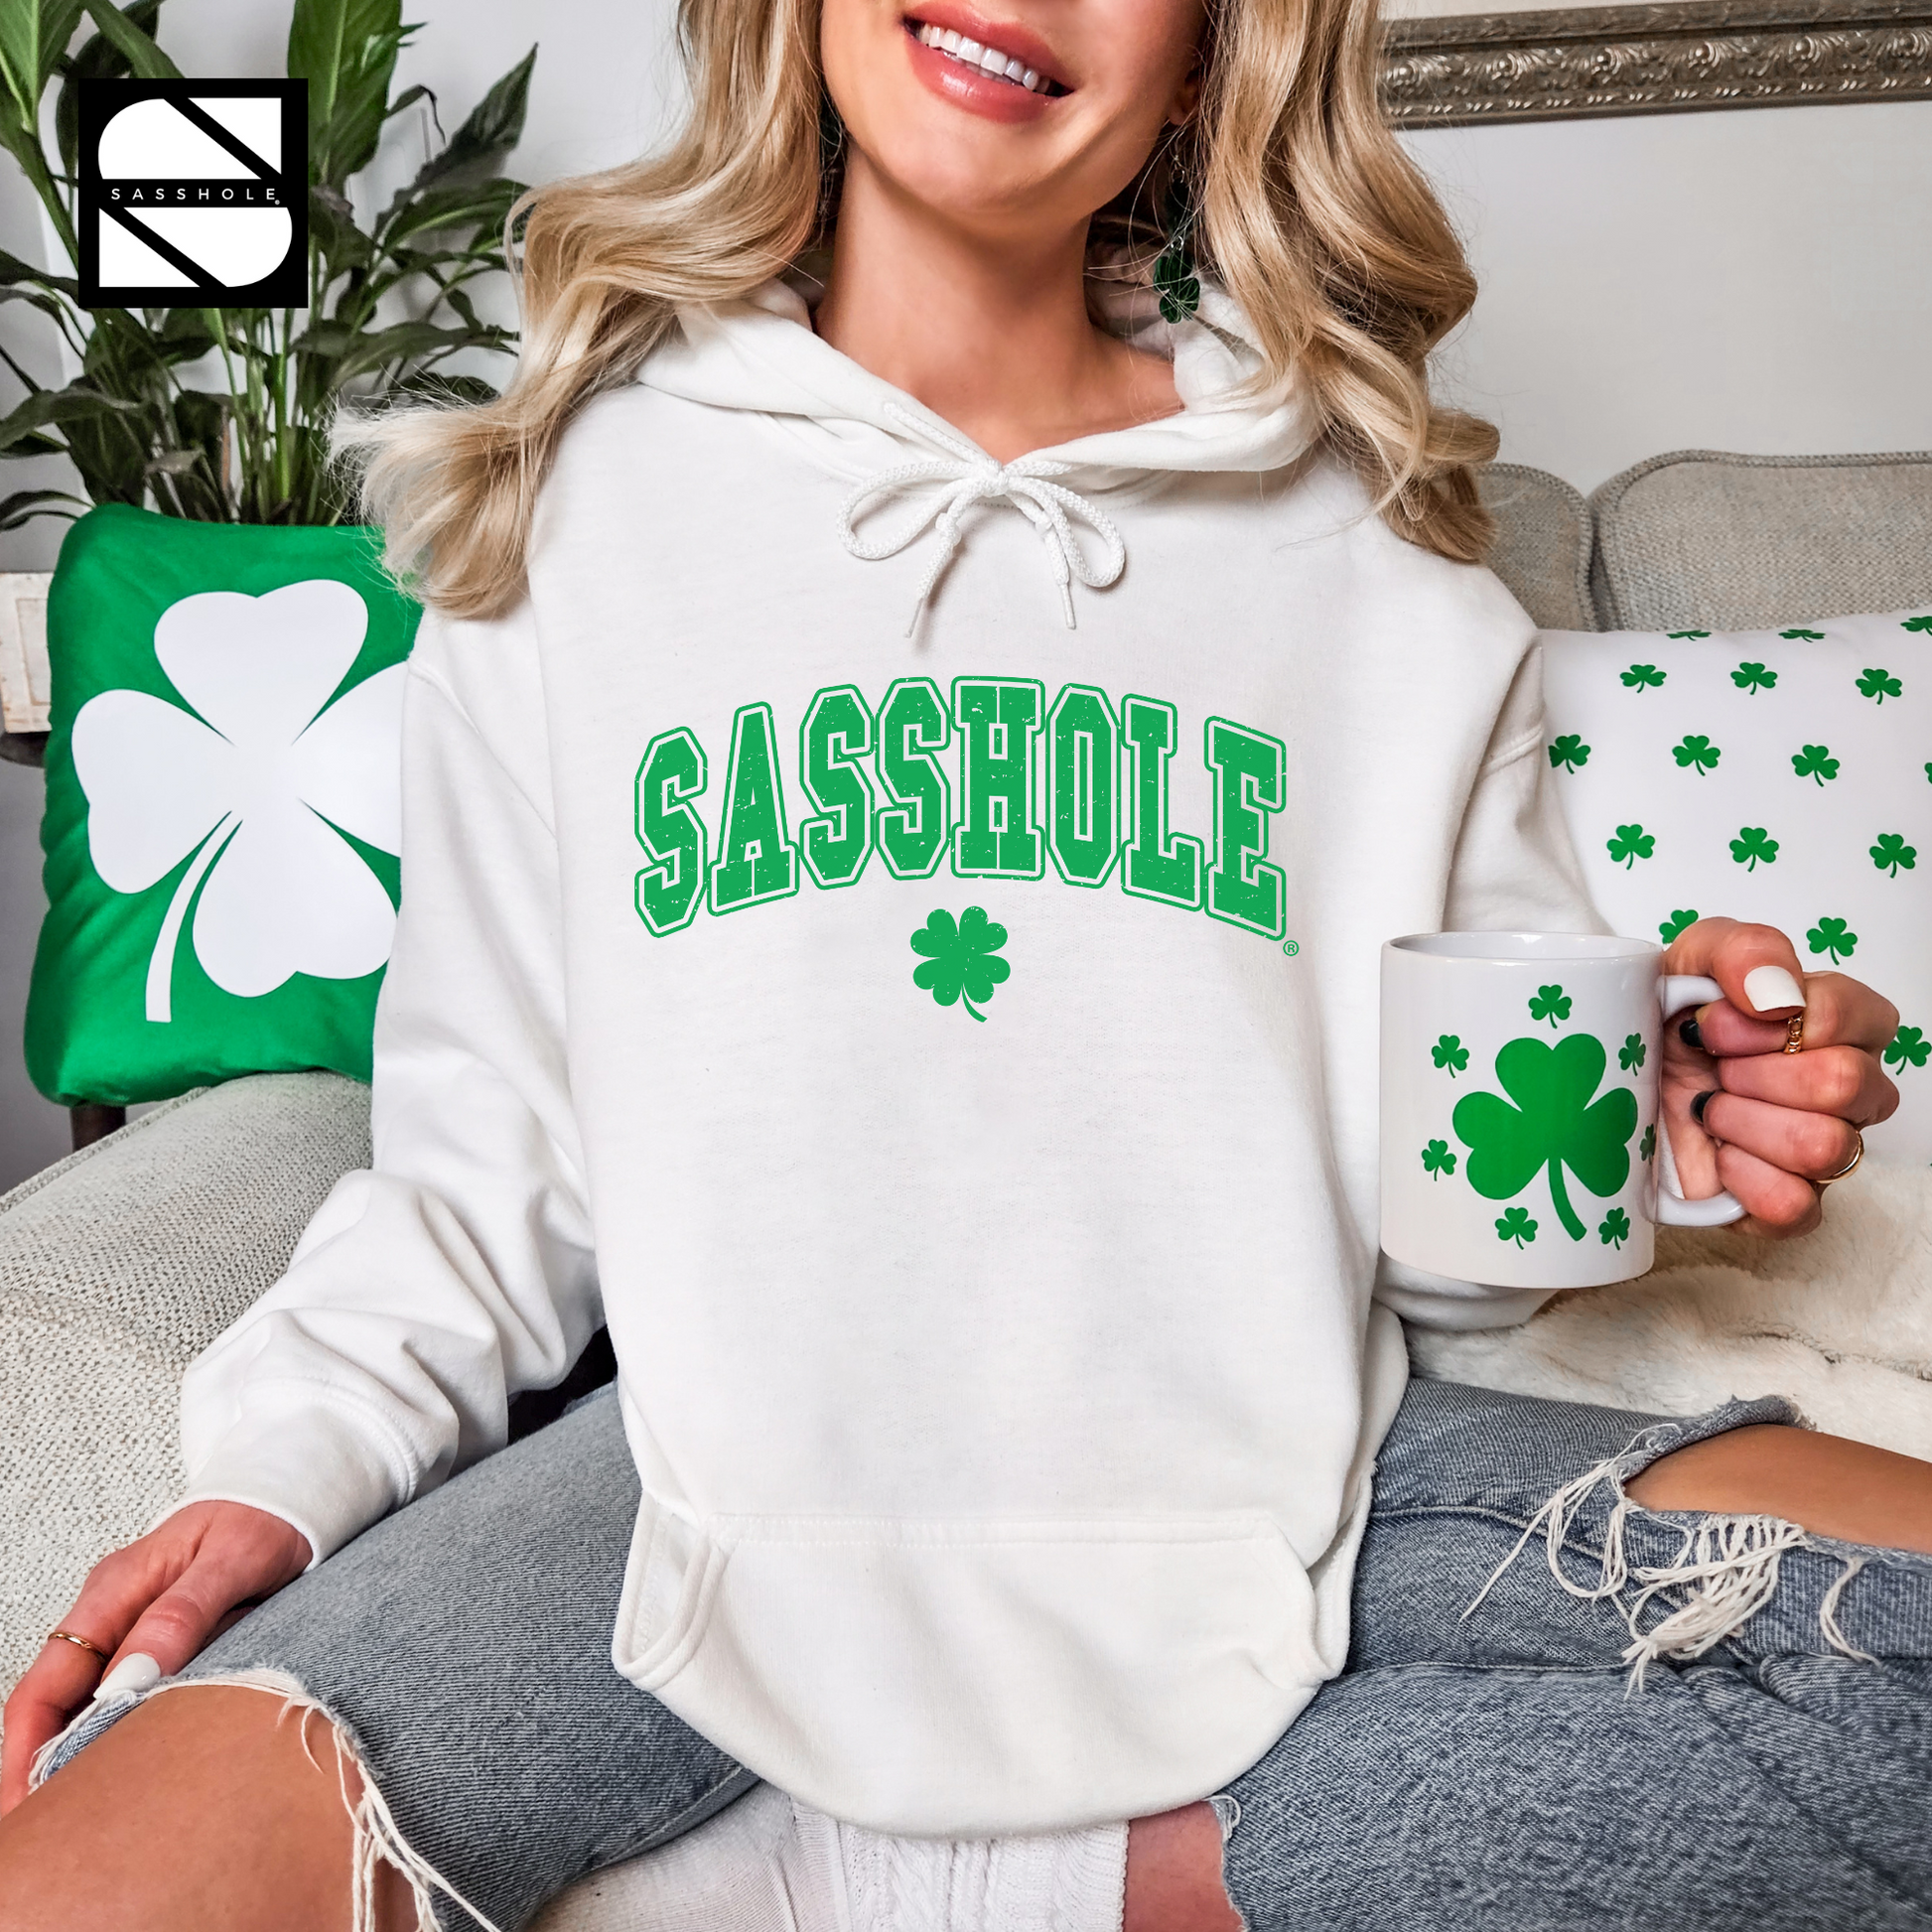 Women's St. Patrick's Day Hoodie, Women's Lucky Charm Tee, Women's Green and Cute Shirt, Women's Festive Green Hoodie, Women's Clothing, Women's Bold Green Attire, Unisex, Unique St. Patrick's Day Top, Unique St. Paddy's Day Hoodie, Trendy St. Paddy's Day Outfit, Trendy Irish Statement Wear, St. Patrick's Day Vibe Tee, St. Patrick's Day Shirt for Women, St. Patrick's Day Chic Fashion, St. Paddy's Day Swagger Wear, St. Paddy's Day Statement Wear, St. Paddy's Day Fun Tee